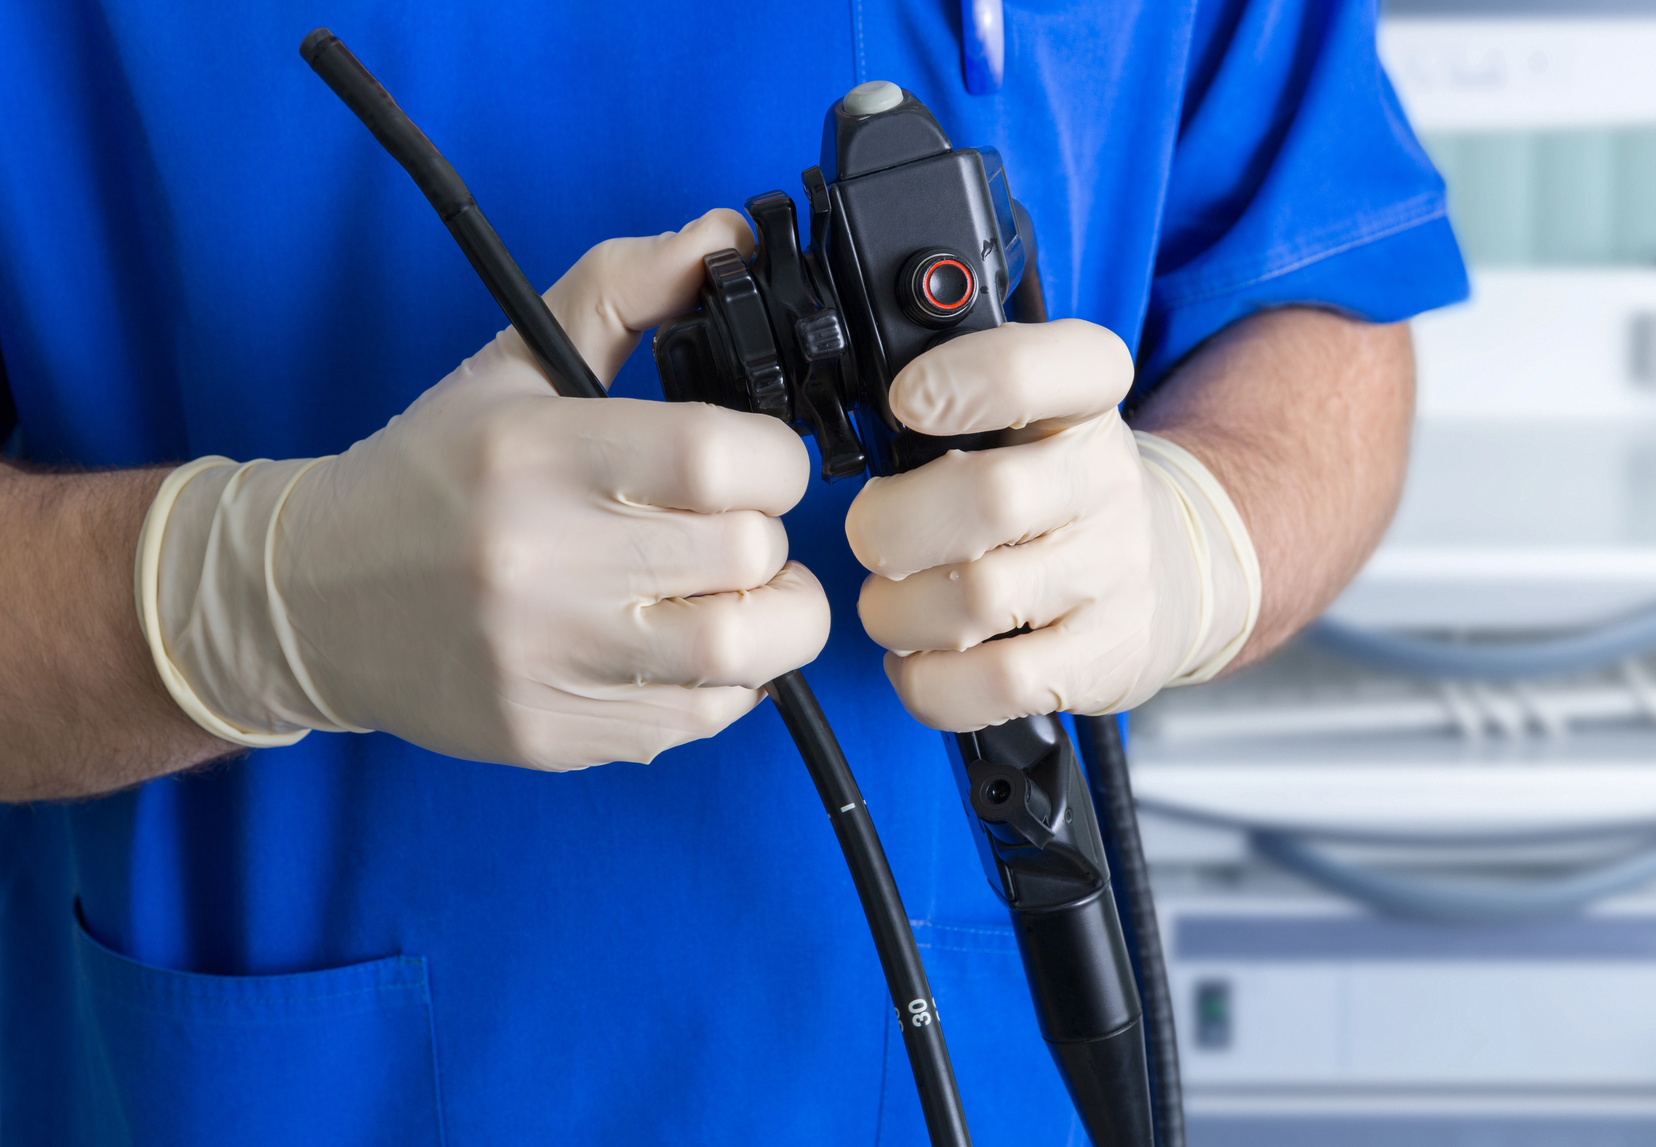 79937807 - the endoscope in the hands of a doctor: © Kot63 / Fotolia.com